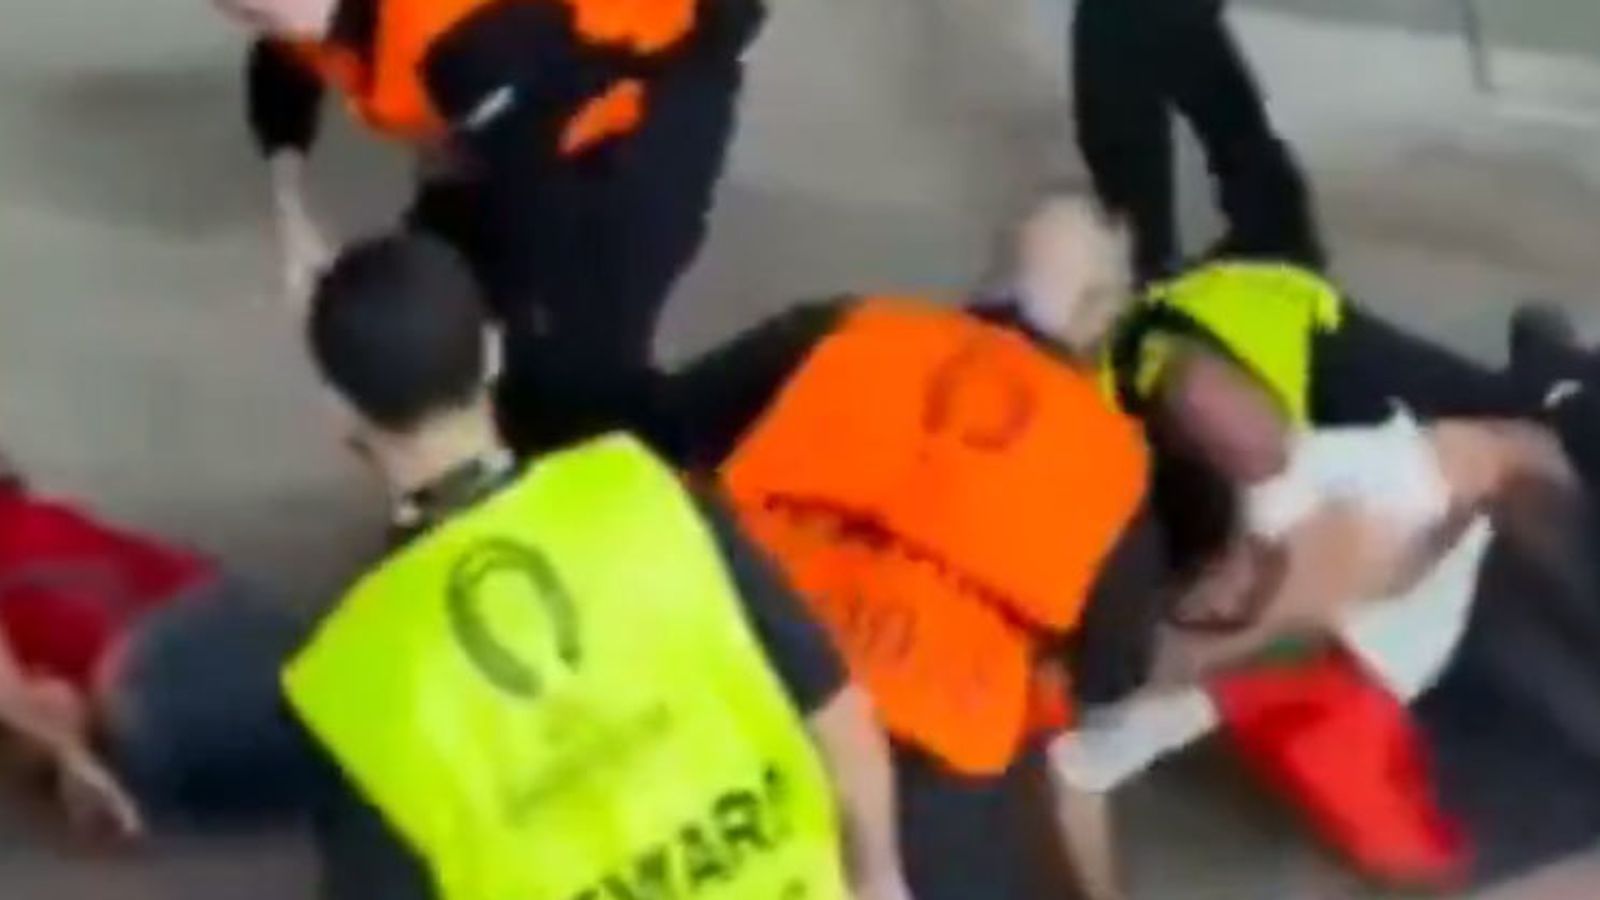 Euro 2024: UEFA say police investigating video showing ‘fan’ punched and kicked by ‘security’